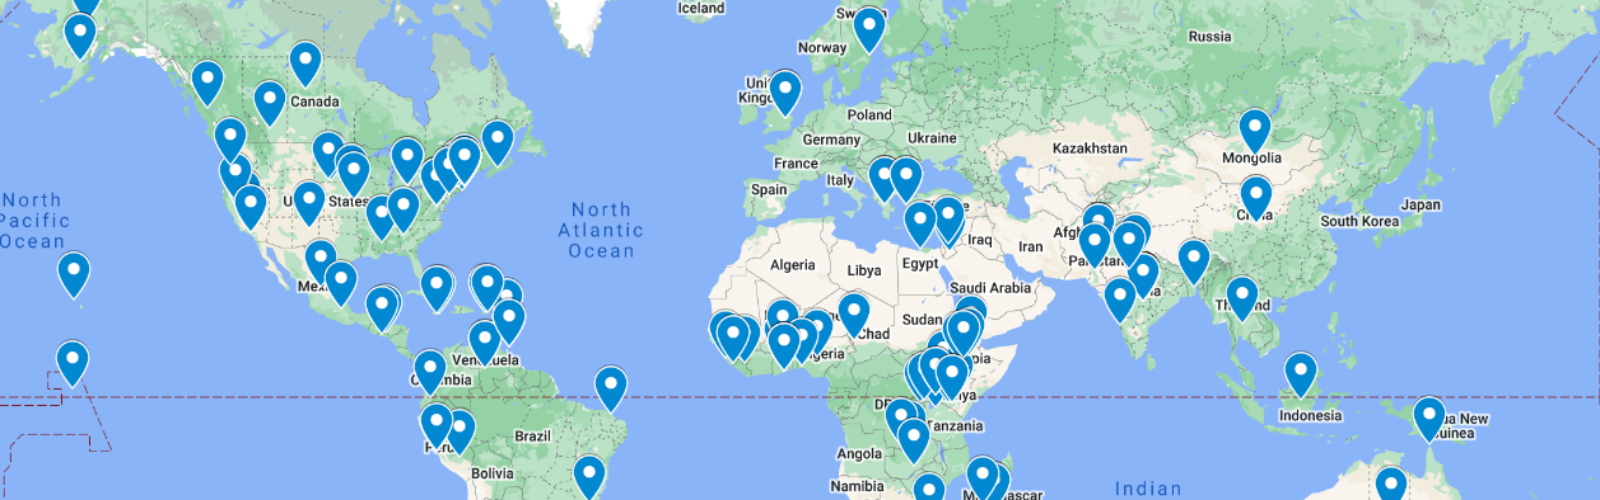 Interactive Rose Service Learning Fellowship Map